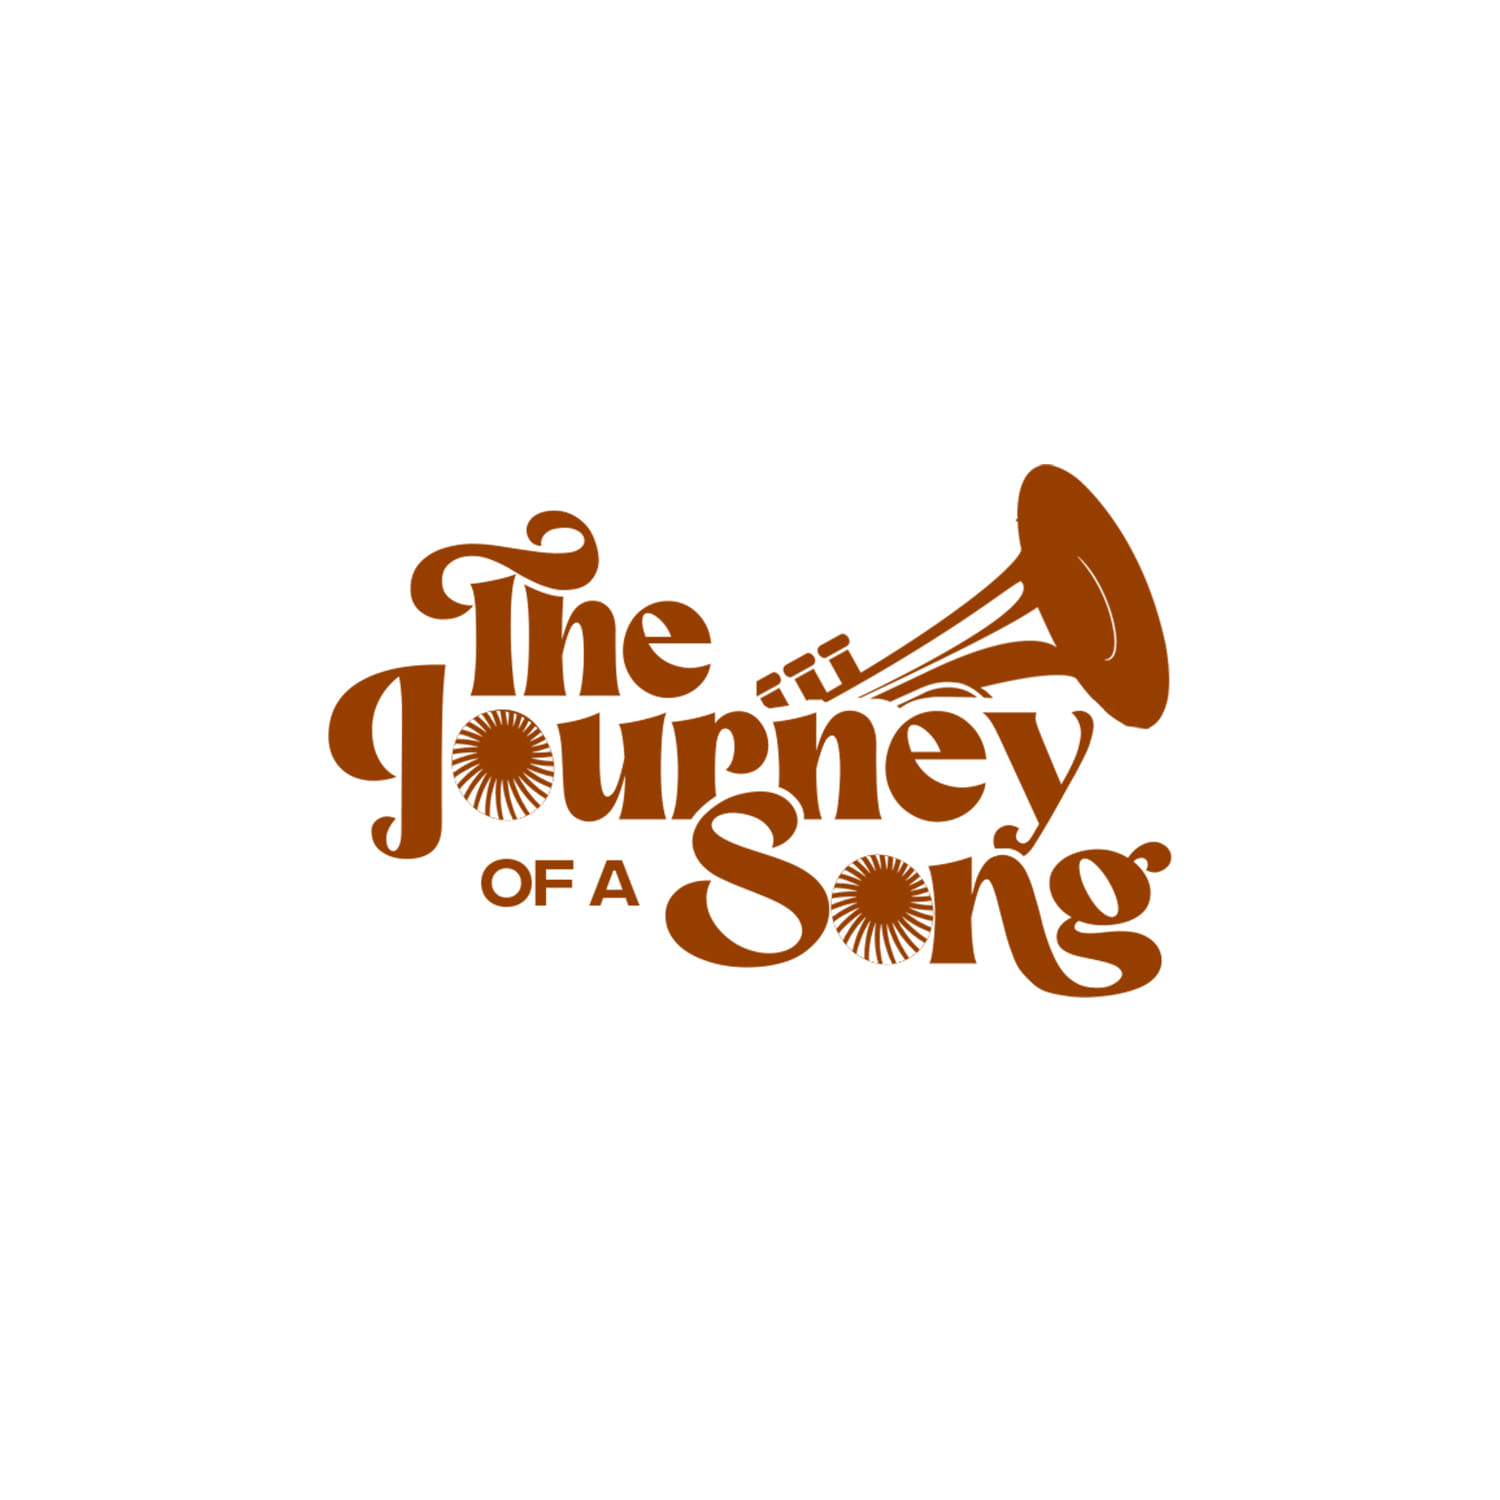 Journey of A Song